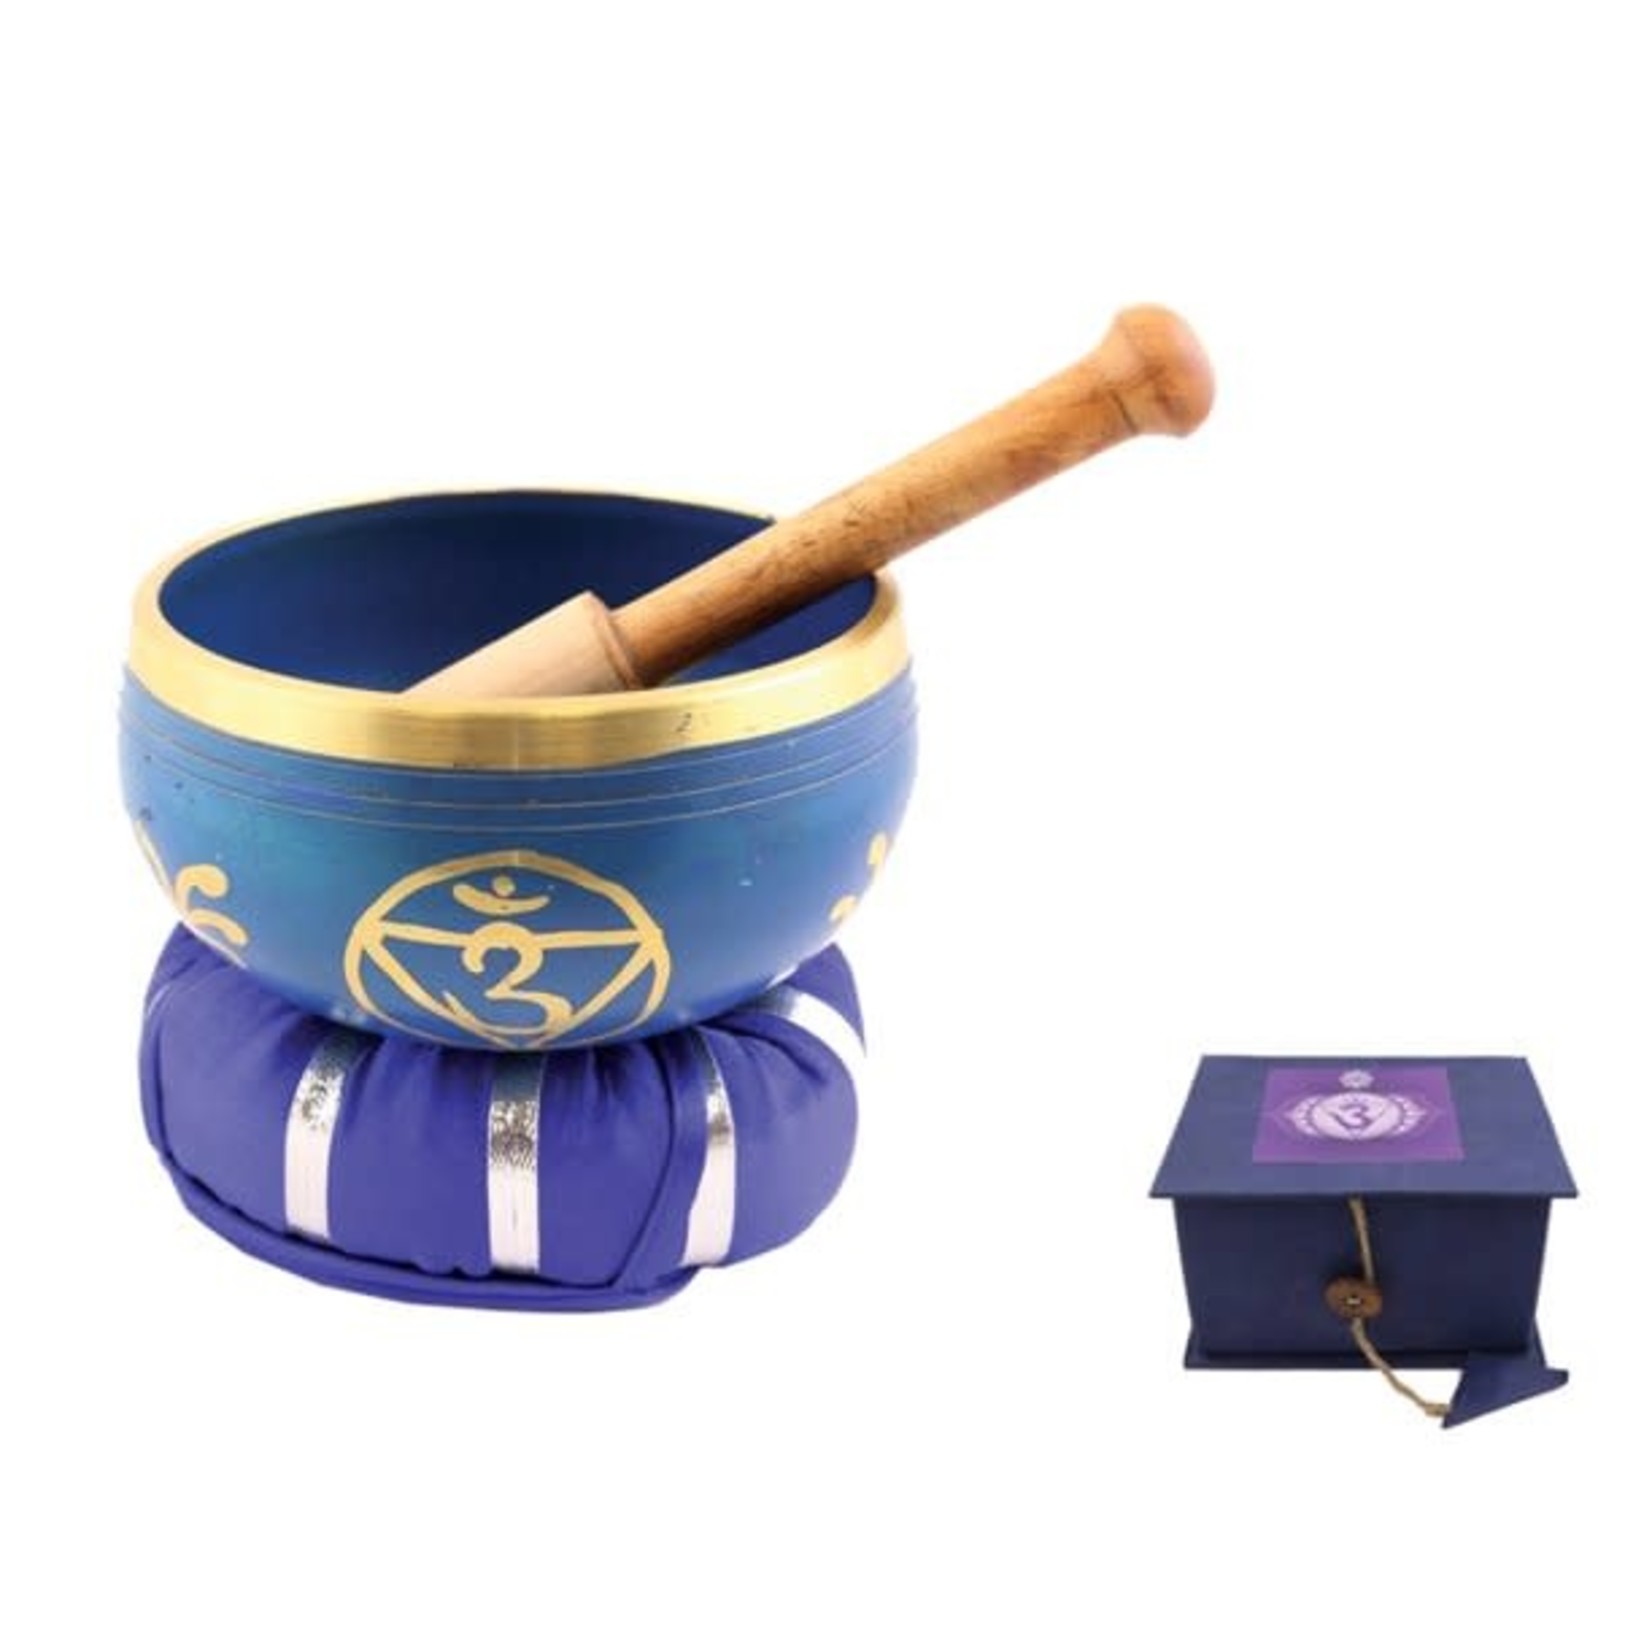 FANTASY GIFTS Singing Bowl With Cushion & Stick